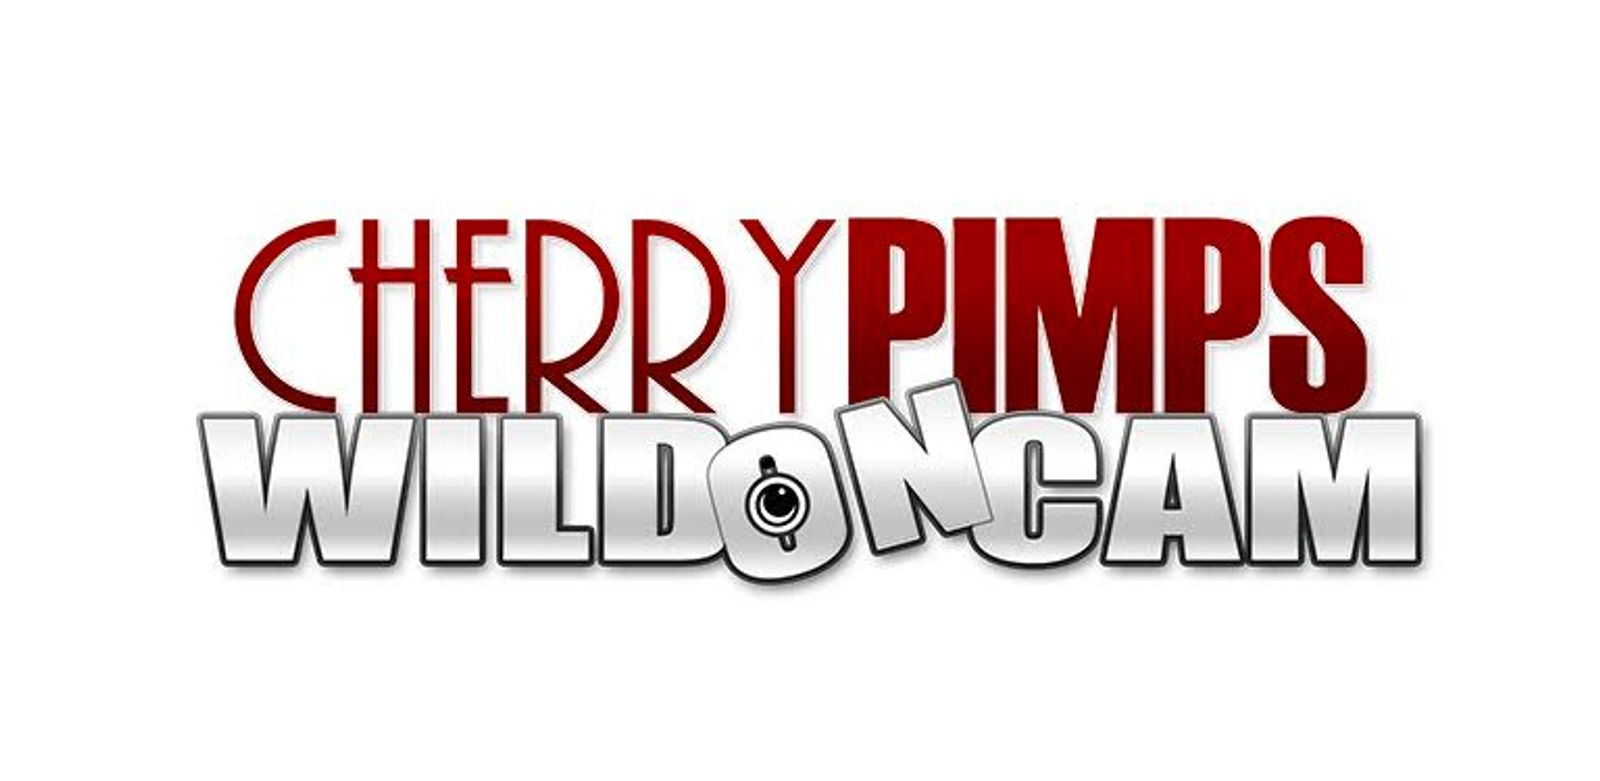 Cherry Pimps WildOnCam Announces Sultry Schedule This Week